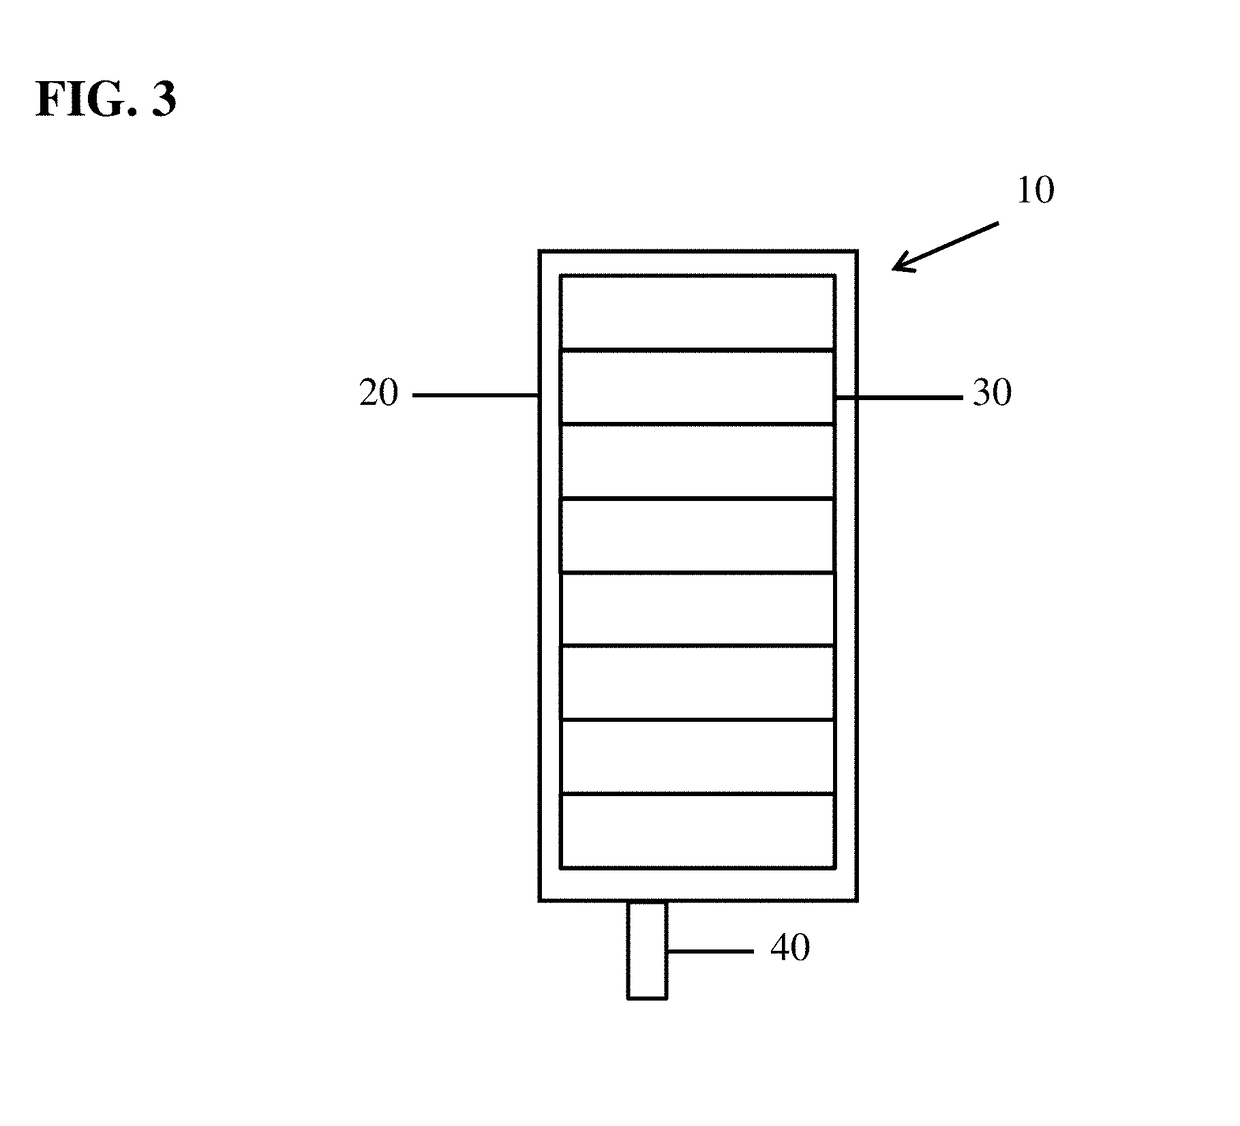 Method for enhancing volumetric capacity in gas storage and release systems